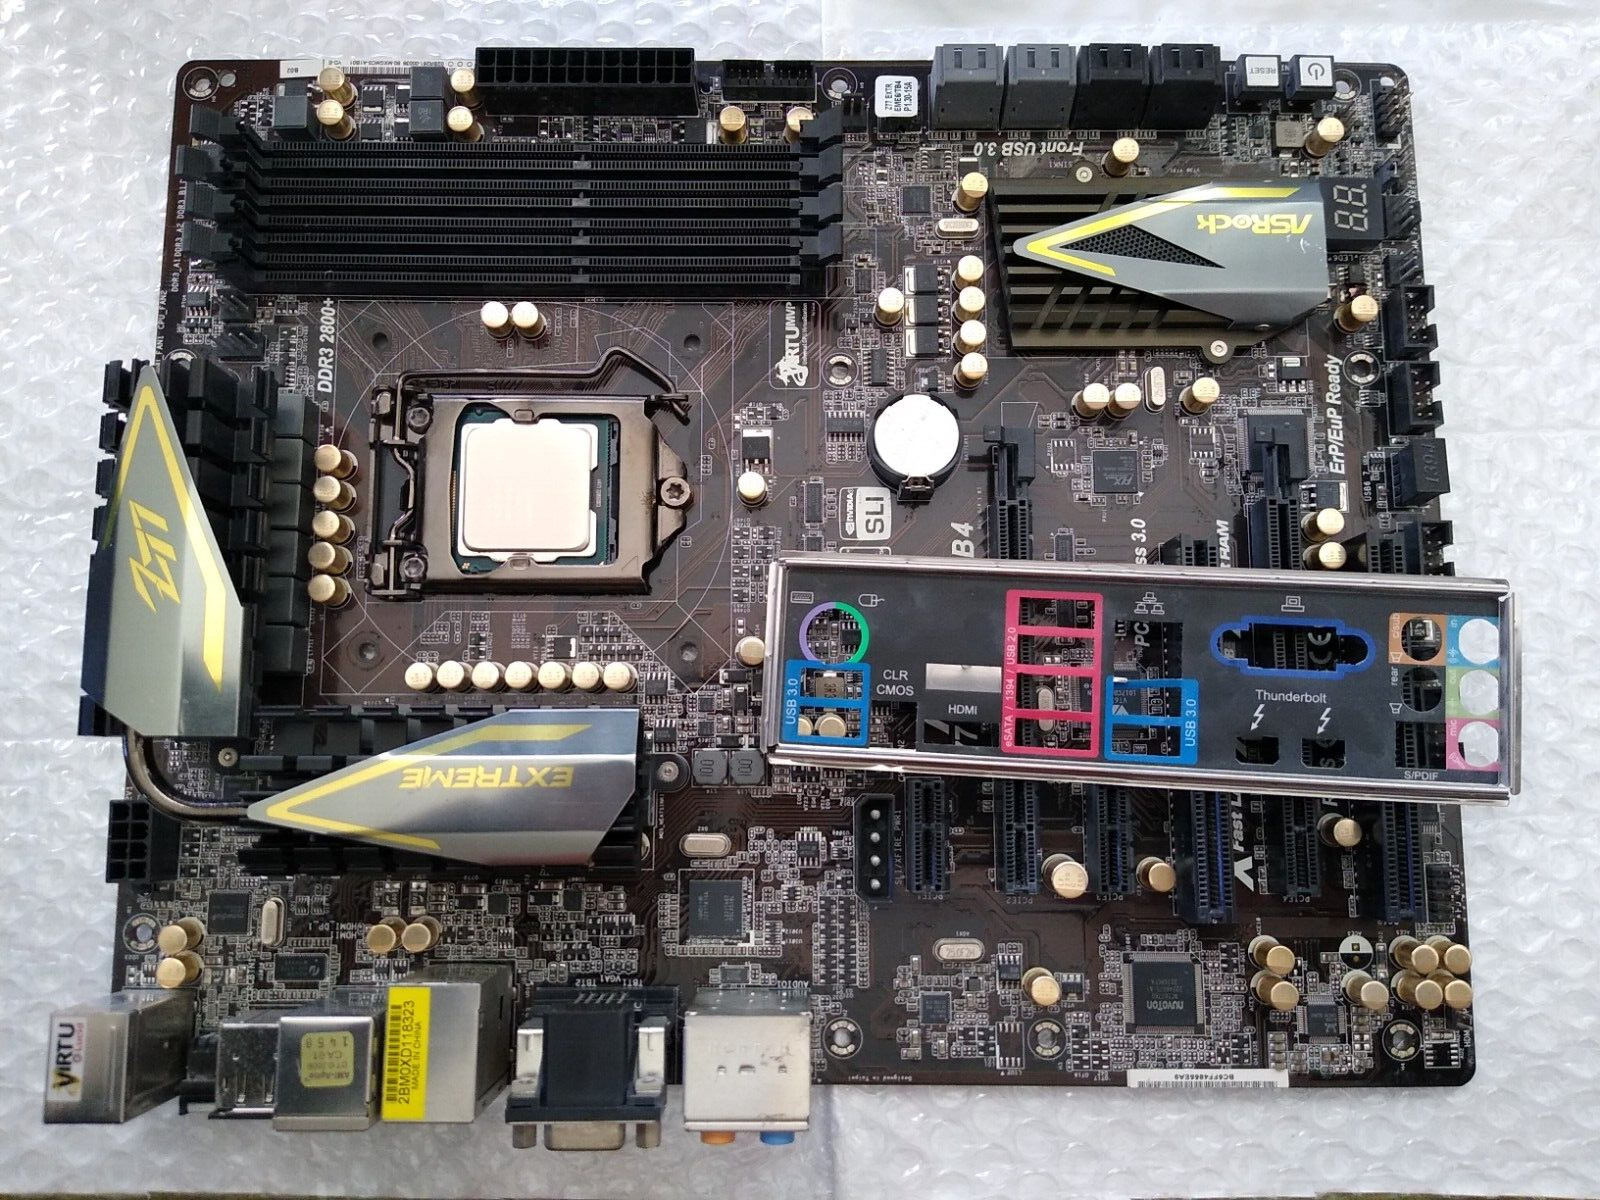 ASRock Z77 Extreme6/TB4 Motherboard With i5-3570K CPU W/ I/O shield